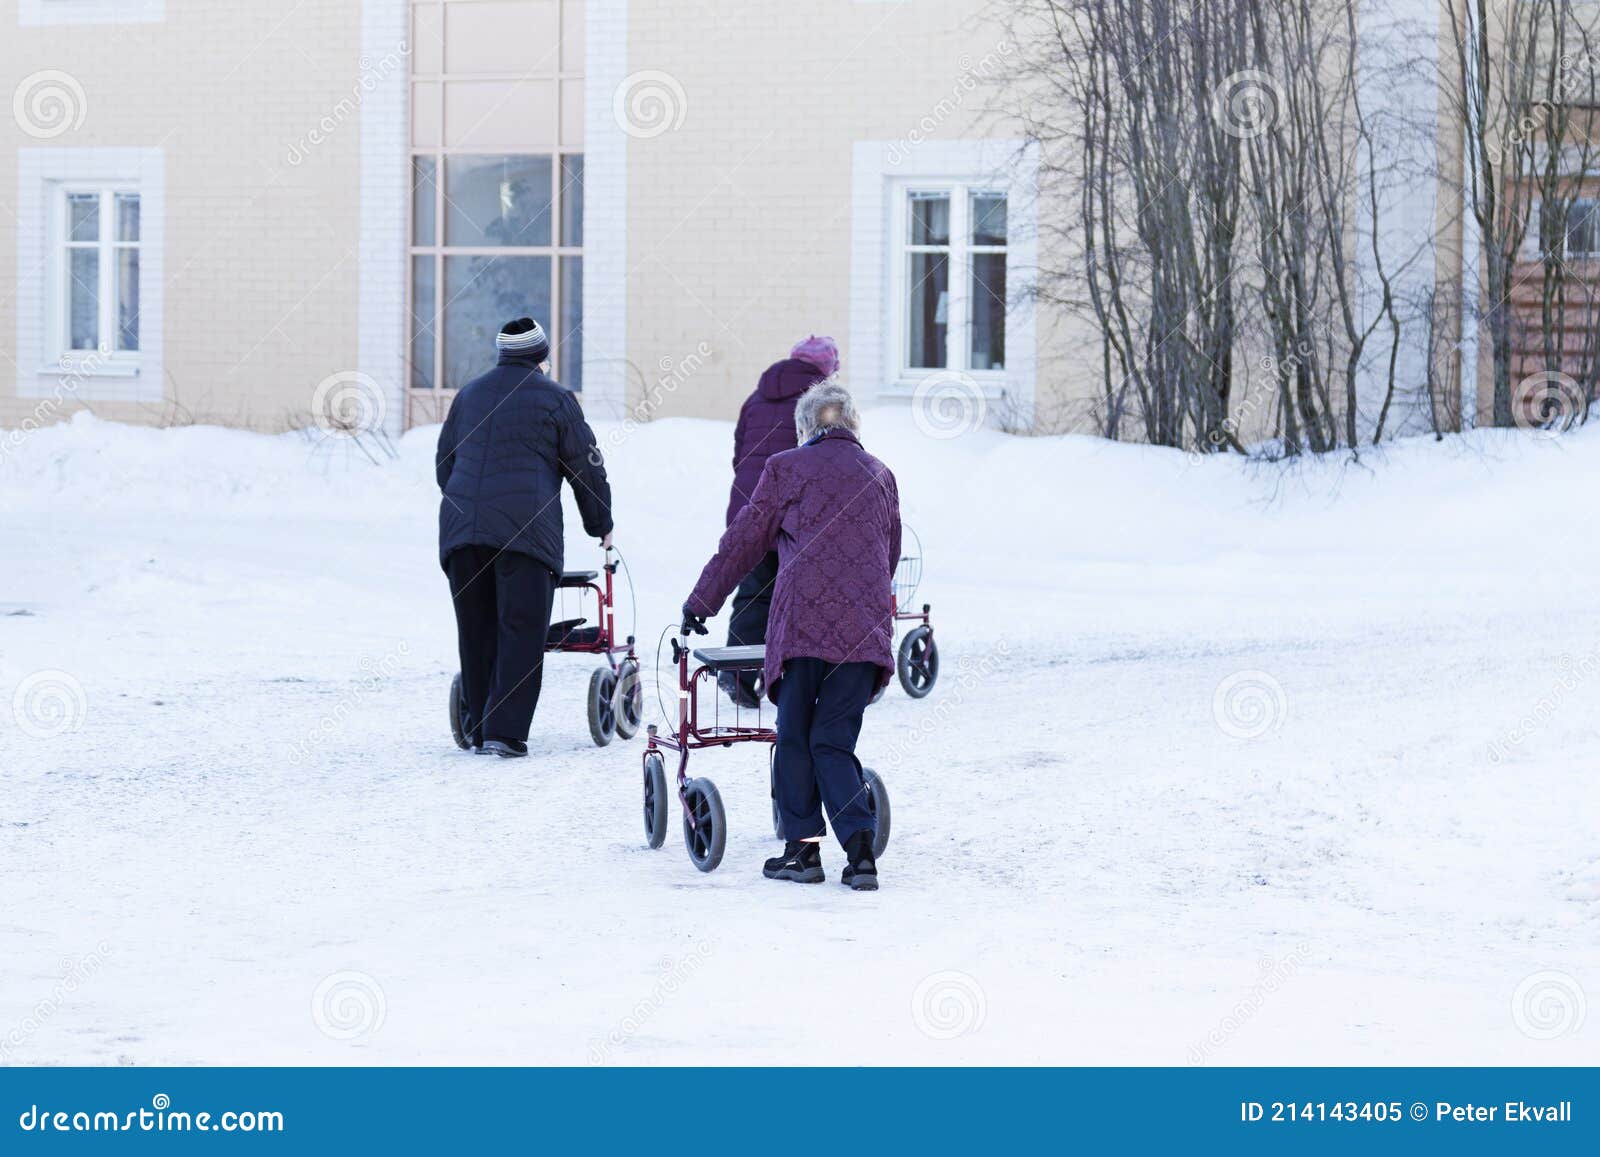 umea-norrland-sweden-march-older-ladies-out-their-walkers-snow-214143405.jpg